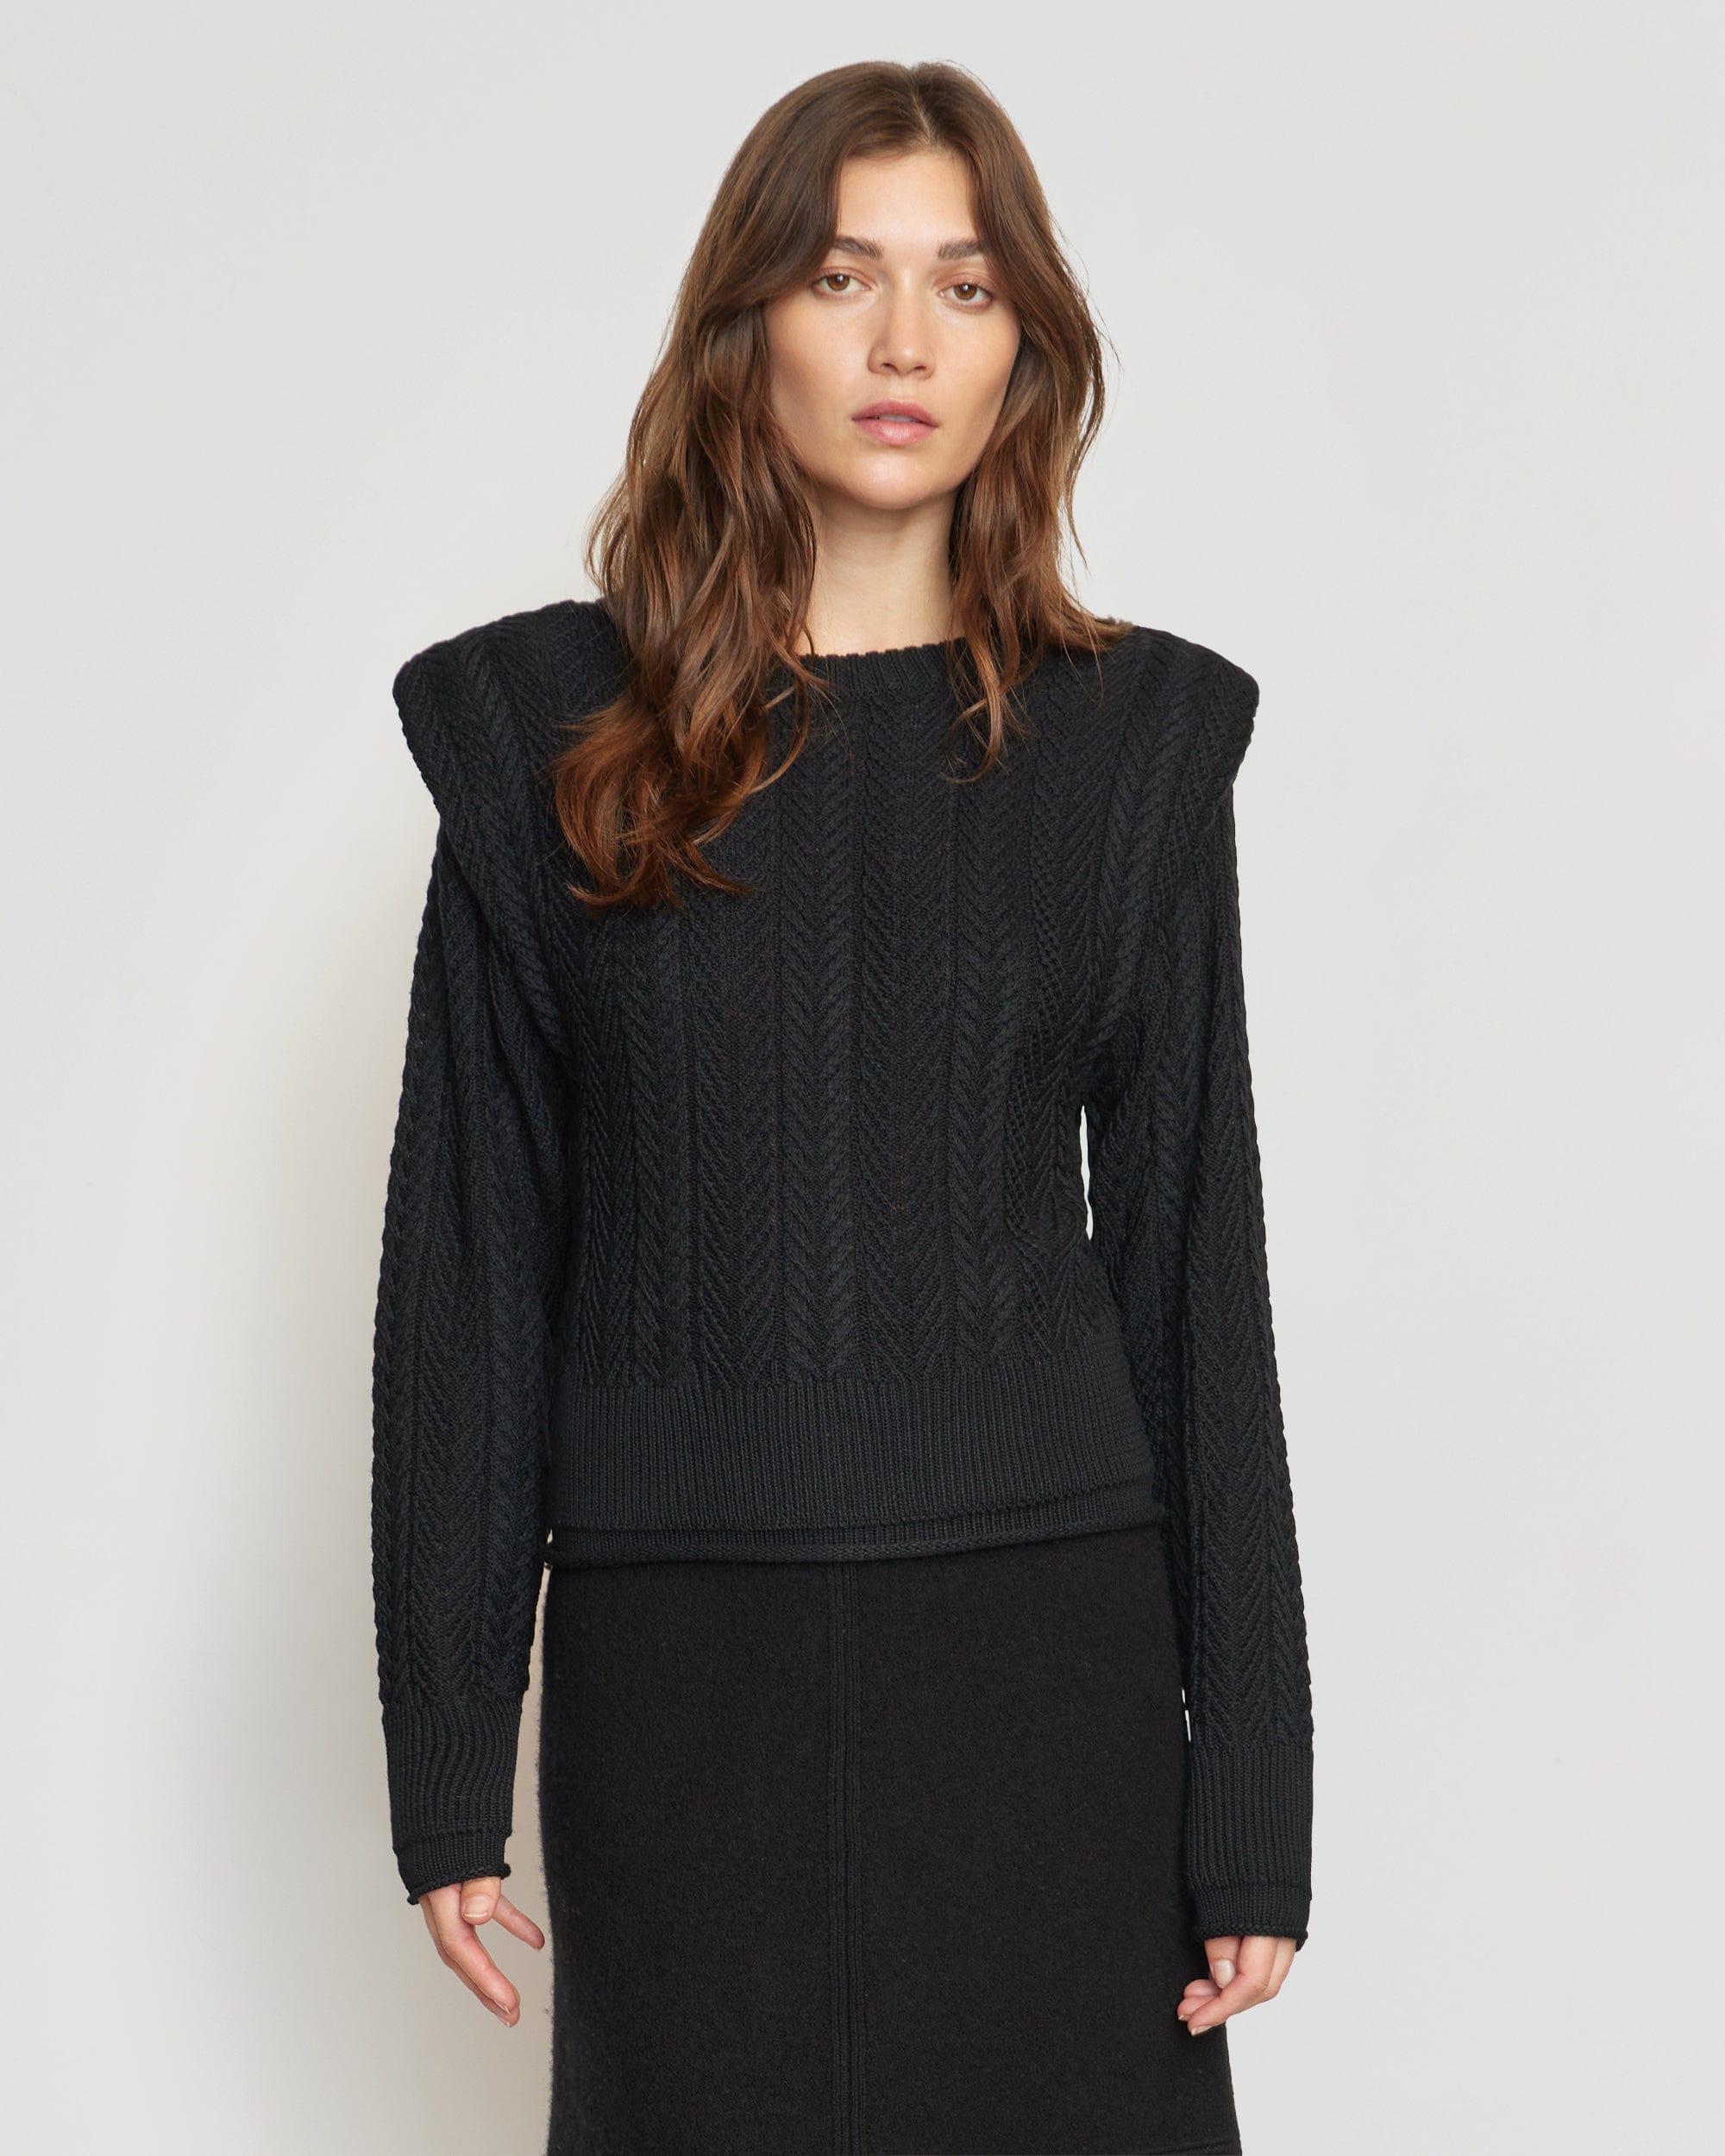 Ziren Cuffed-Shoulder Cable Knit Sweater